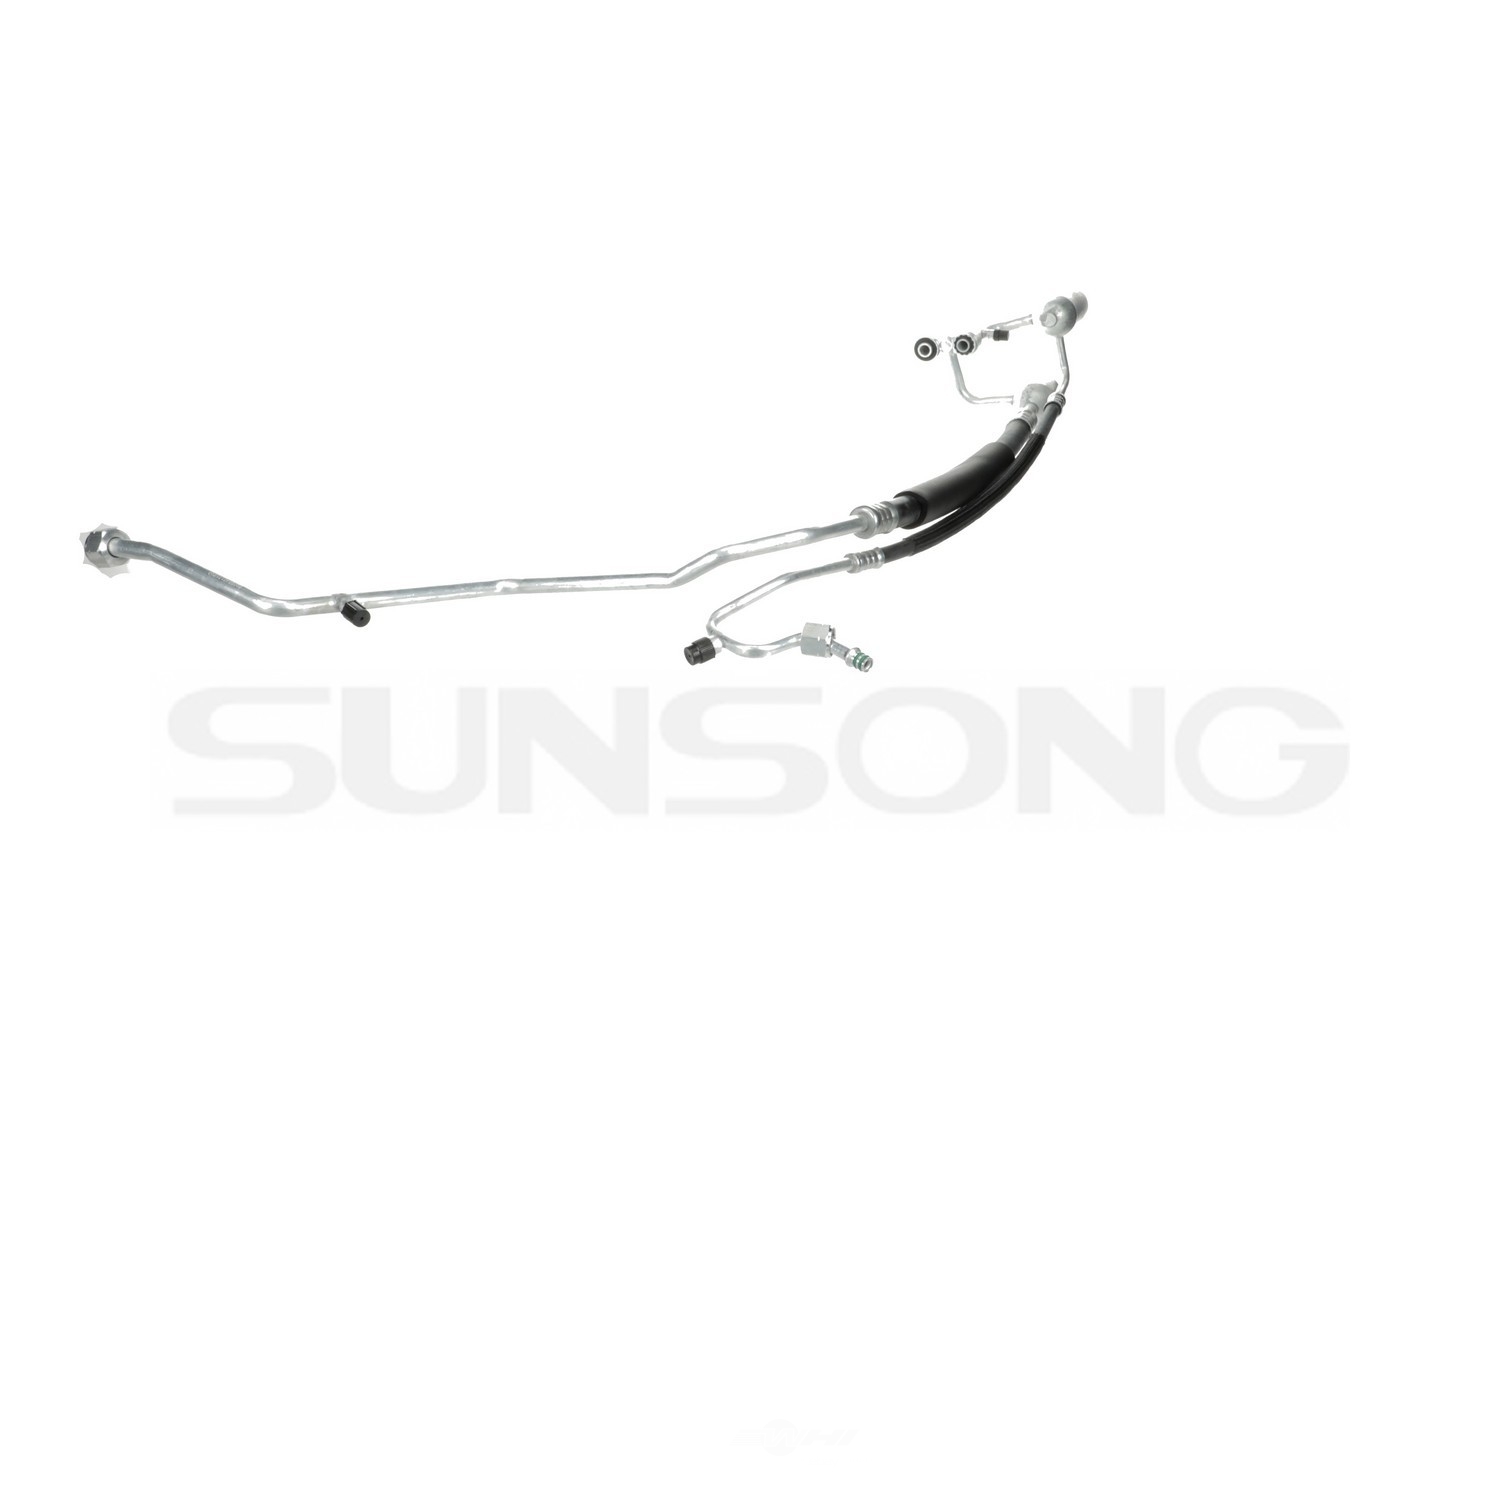 SUNSONG NORTH AMERICA - A/C Refrigerant Discharge / Suction Hose Assembly - SUG 5203340